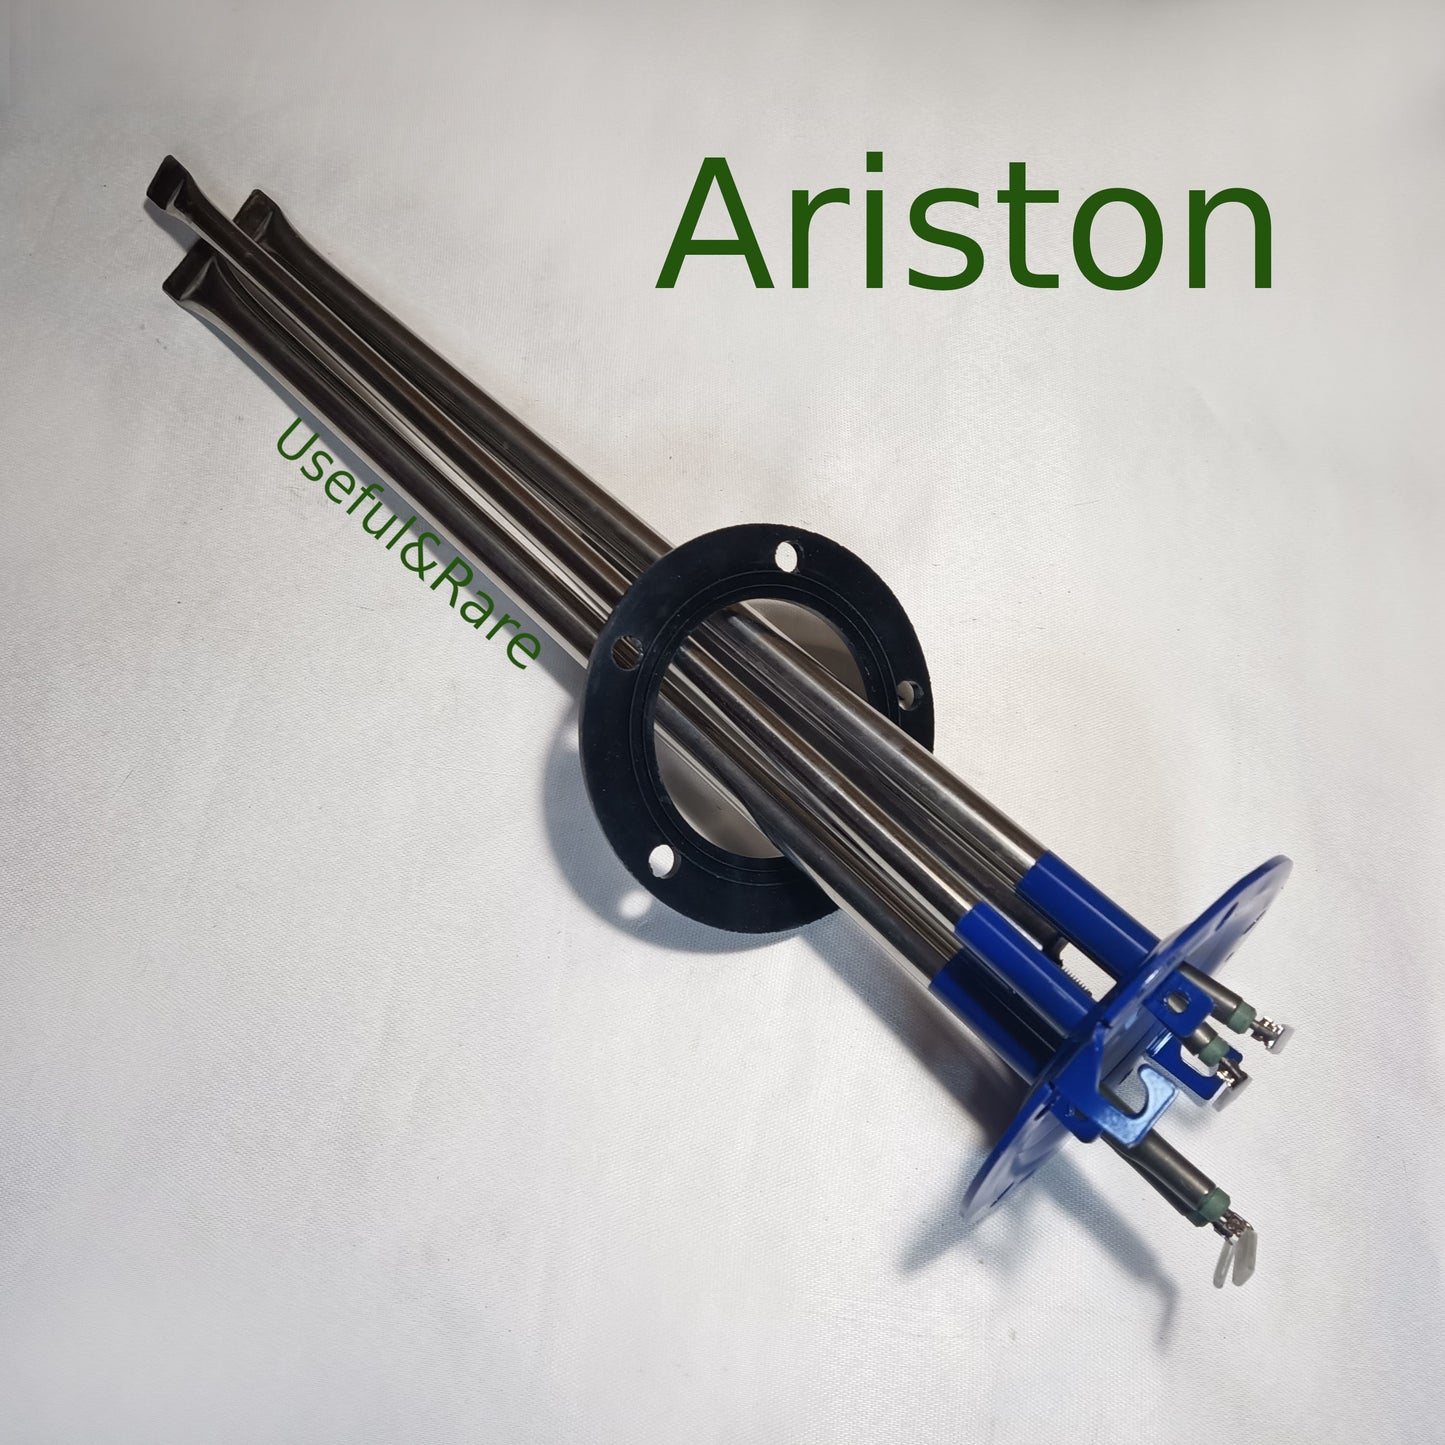 Ariston boiler repair kit: D124mm flange with dry heating elements 2x750W and anode